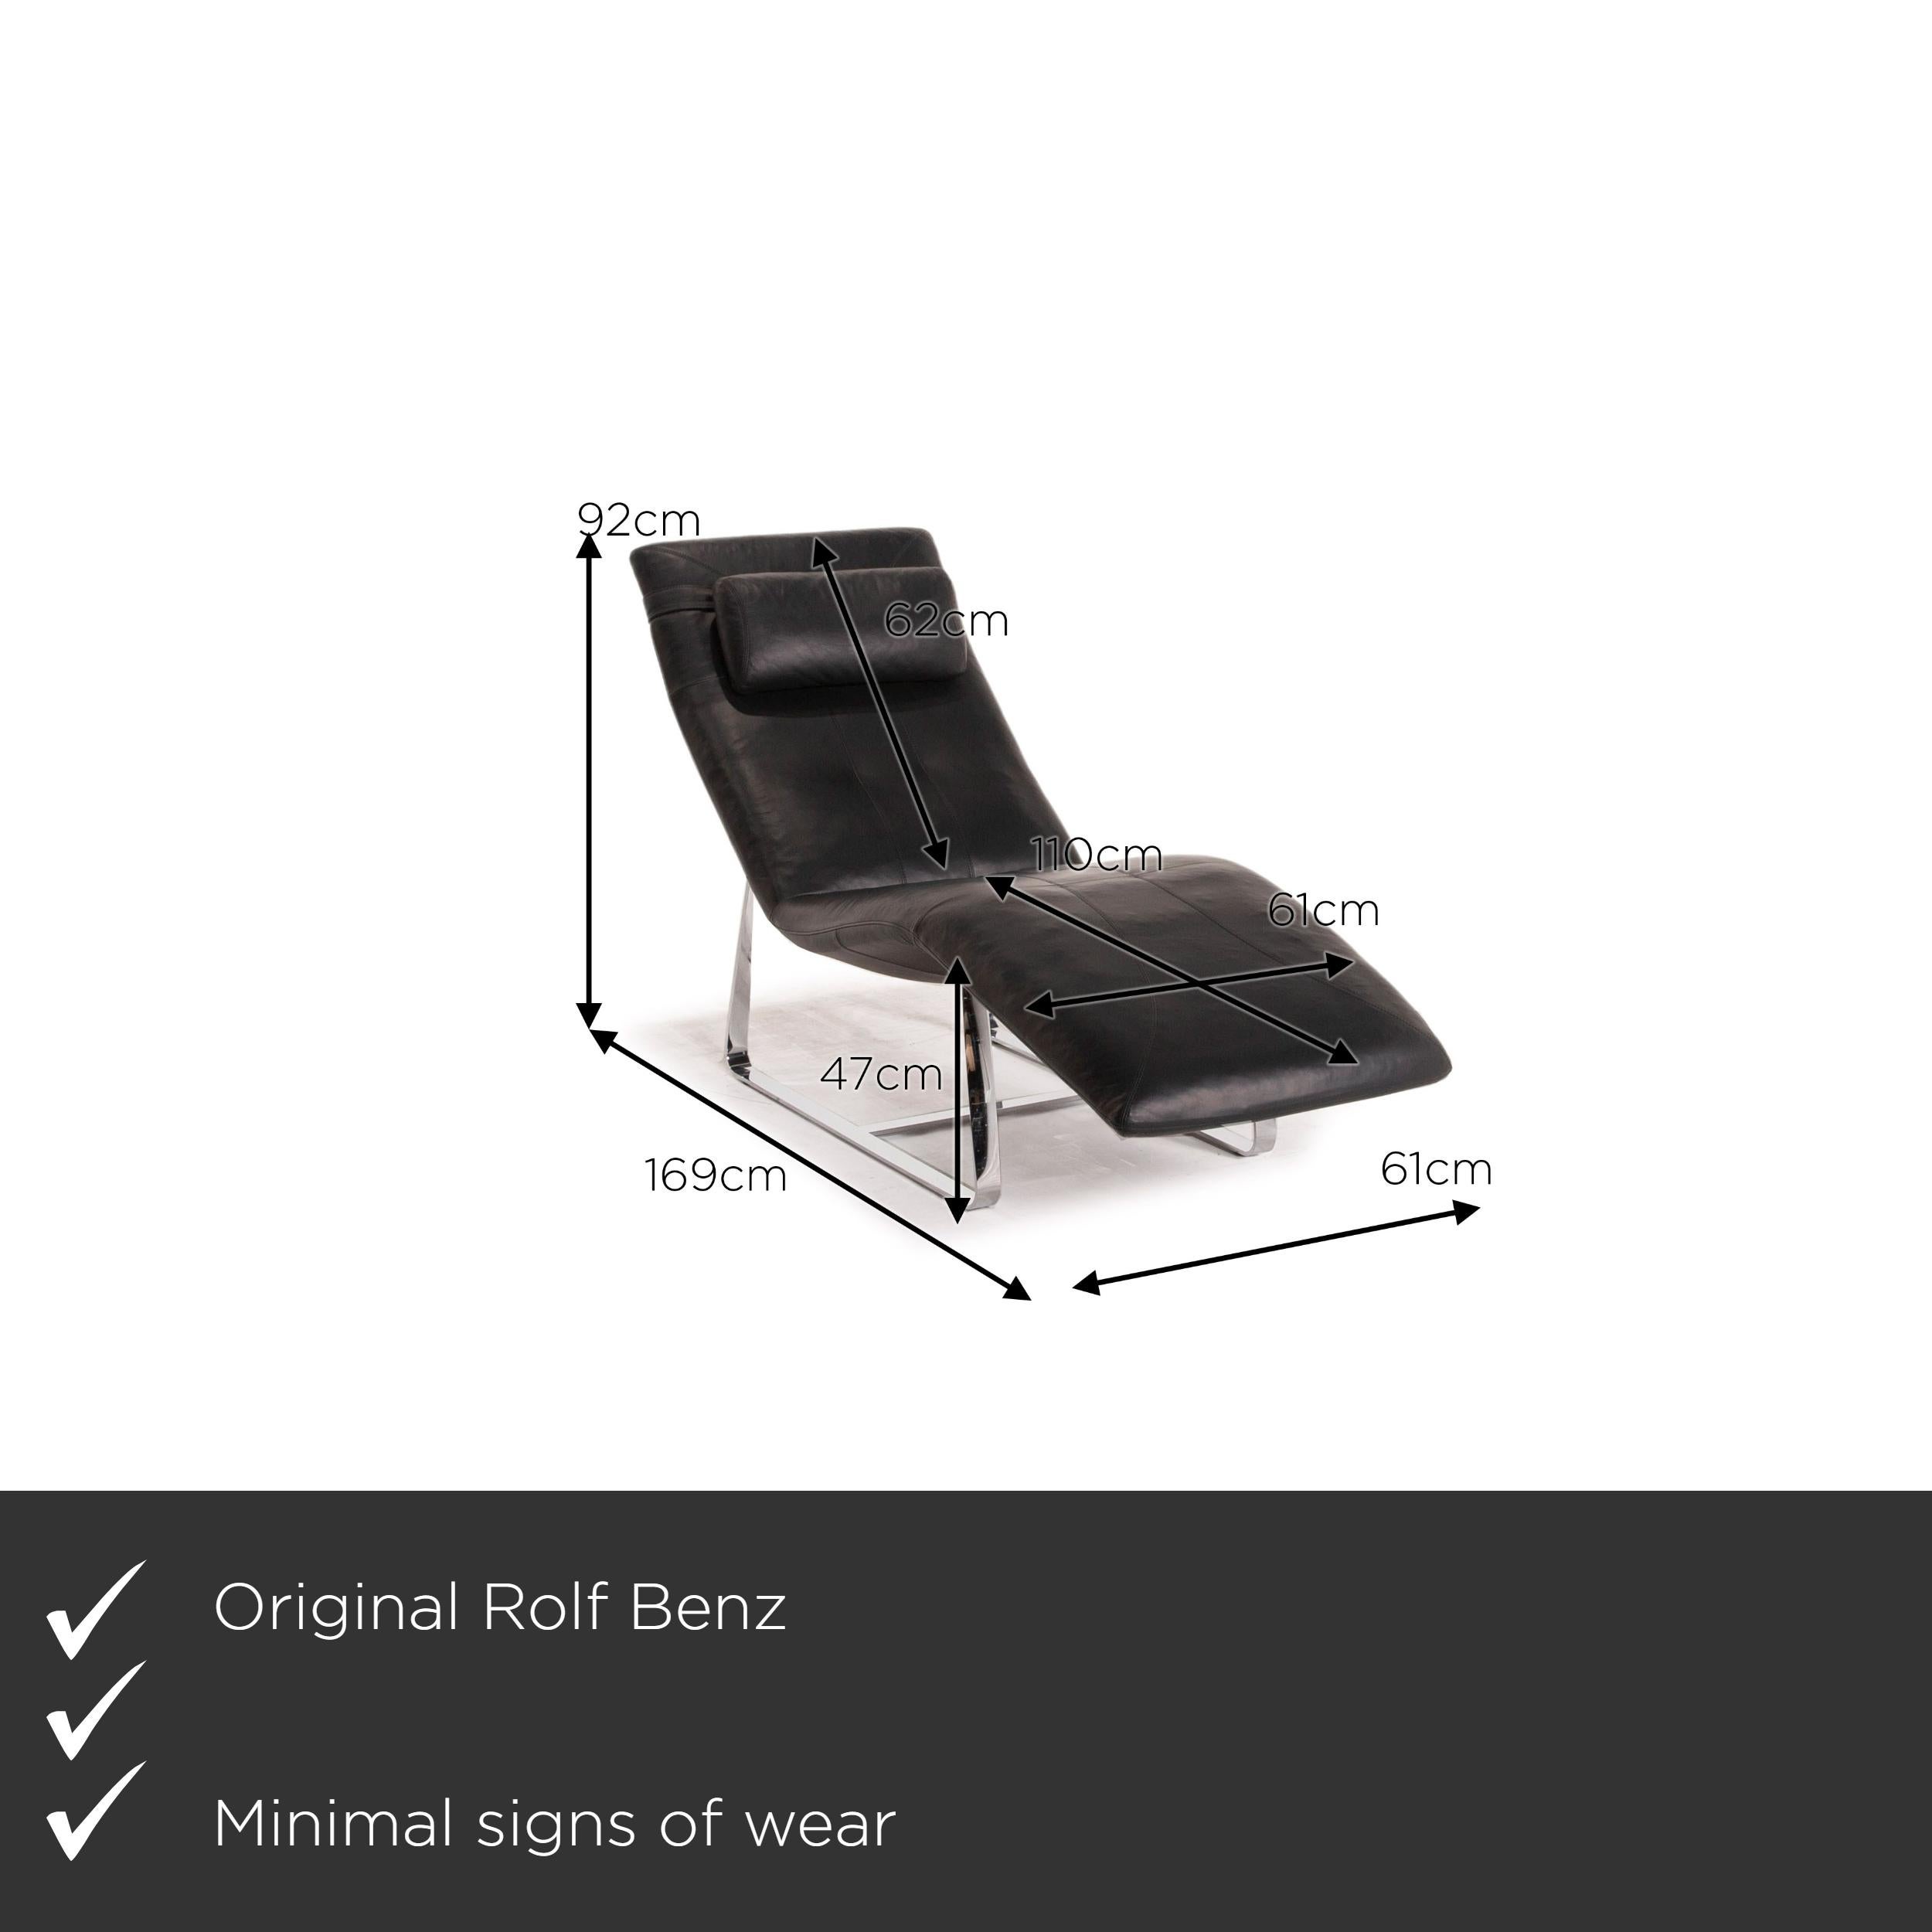 We present to you a Rolf Benz LC 360 leather lounger black.


 Product measurements in centimeters:
 

Depth: 169
Width: 61
Height: 92
Seat height: 47
Rest height:
Seat depth: 110
Seat width: 61
Back height: 62.
 